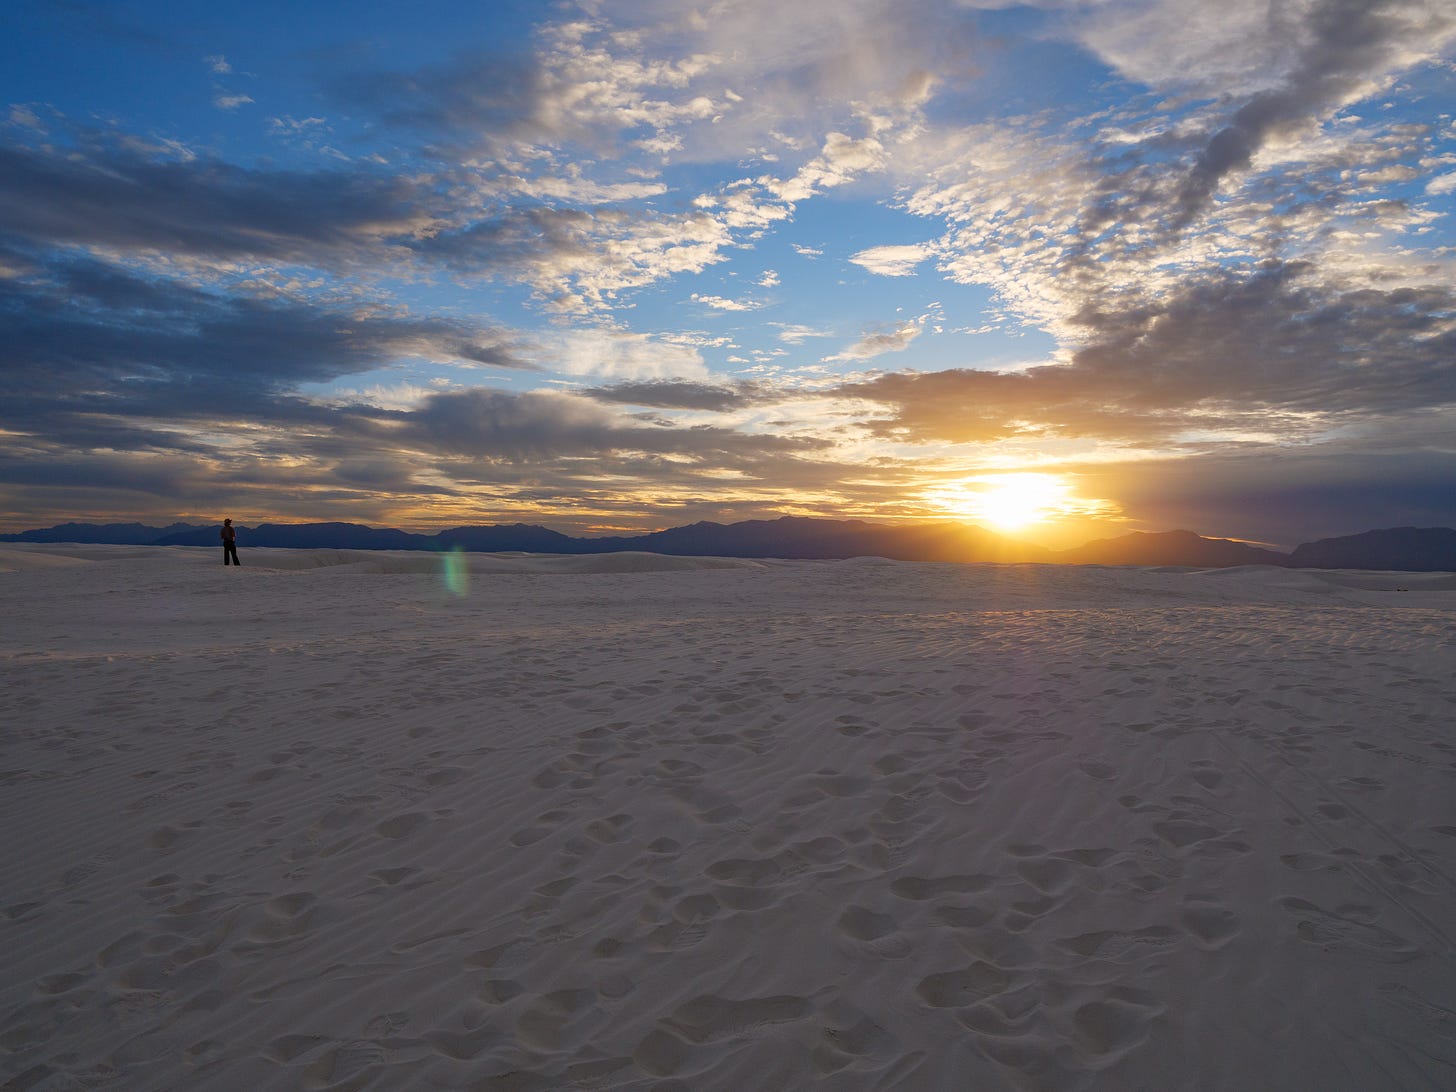 A wide view of White Sands National Park. White powdery sand fills the lower half of the photo. In the sand you can see contours and striations created by the winds and the footsteps of visitors. On the left, near the edge of the visible sand, stands a solitary figure, a park ranger. They are looking towards the distant mountains in the background. They are purple and jagged. Just above them, a bright, golden sun is setting in a blue sky interspersed with clouds at different altitudes. The low clouds are deep grey, their edges tinged with rays of the sun. Higher up, the clouds are white.  A sliver of the sand is touched by the sunlight and is colored golden. A small green lens flare (an optical distortion caused by pointing the camera at the sun) floats near the park ranger.